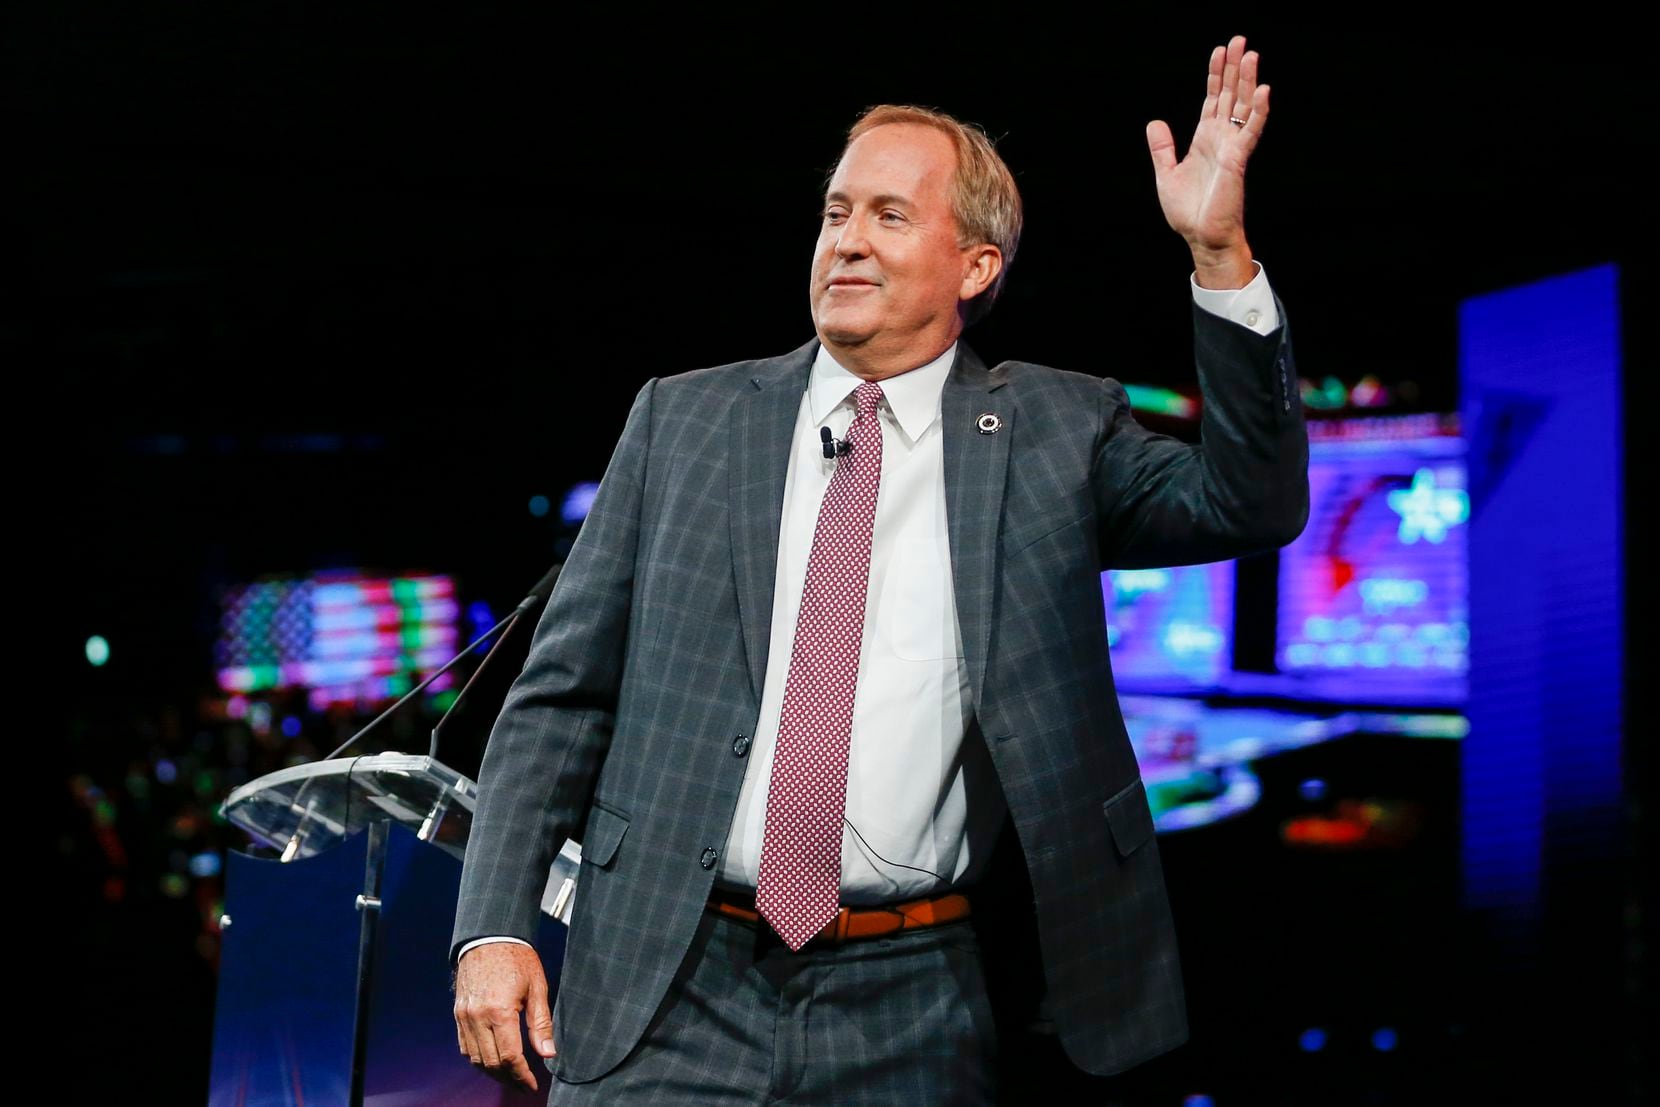 Texas Attorney General Ken Paxton gives remarks at the Conservative Political Action Conference on Sunday, July 11, 2021, in Dallas. (Elias Valverde II/The Dallas Morning News)